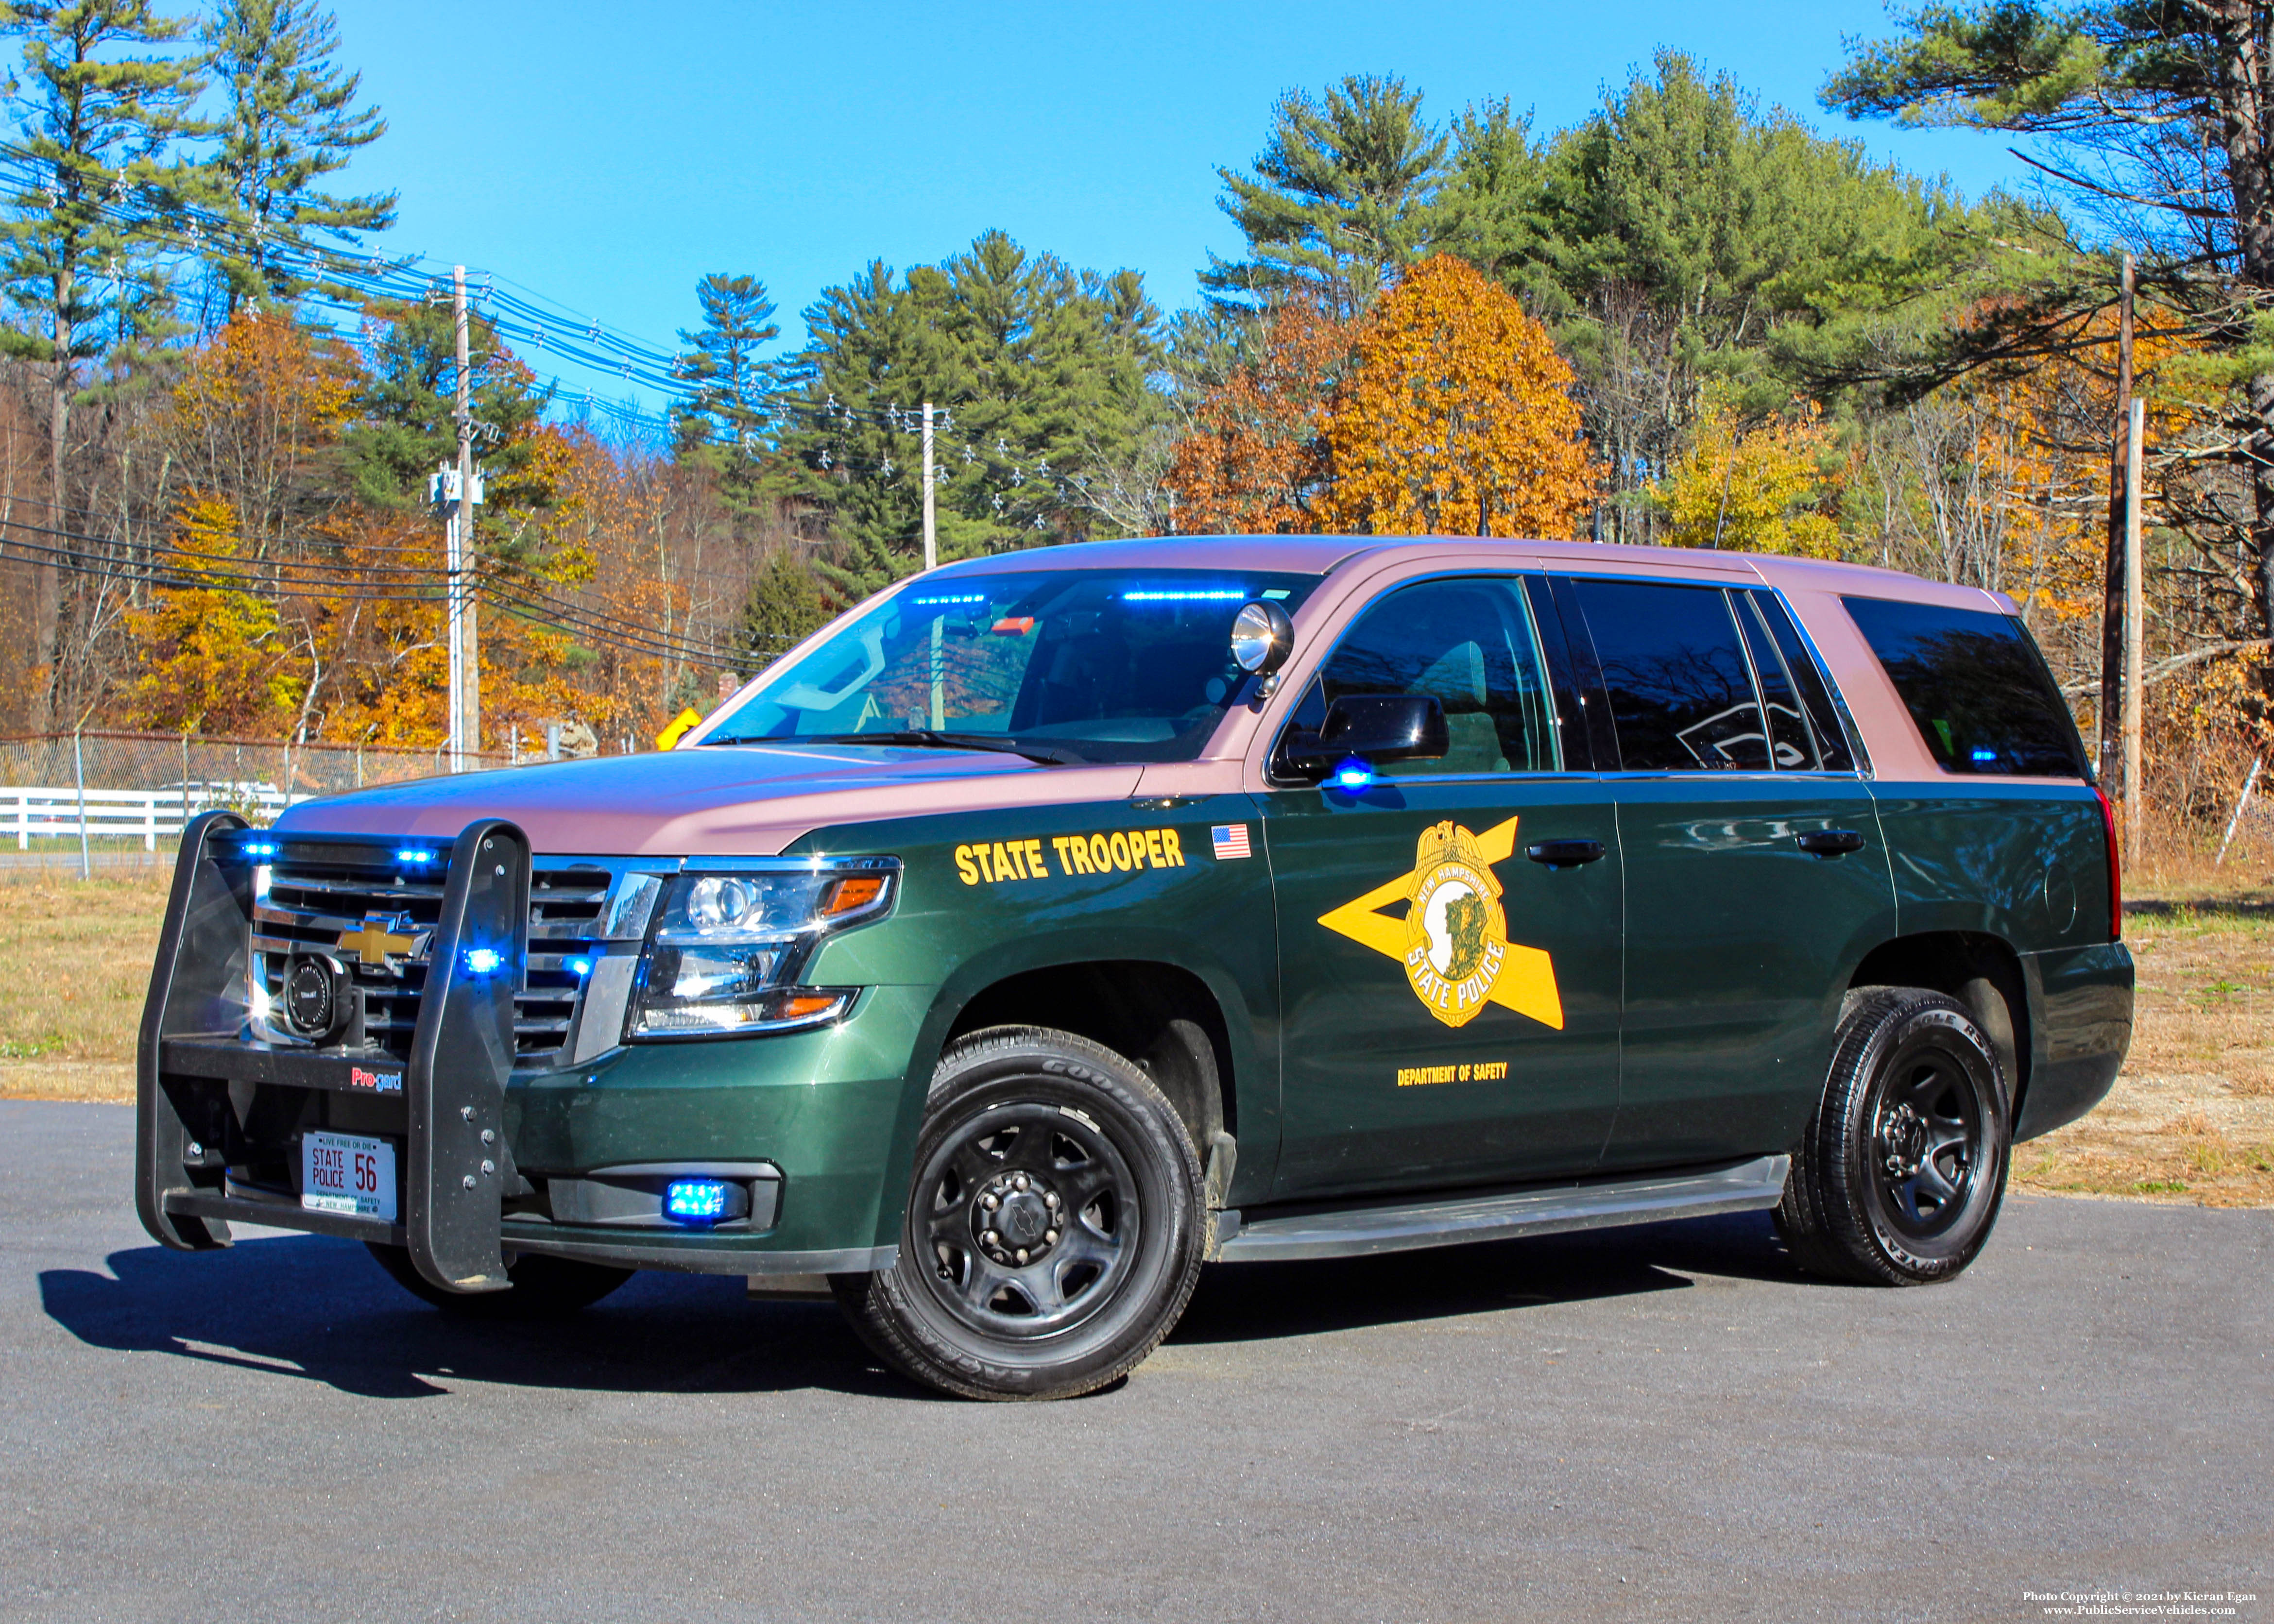 A photo  of New Hampshire State Police
            Cruiser 56, a 2020 Chevrolet Tahoe             taken by Kieran Egan